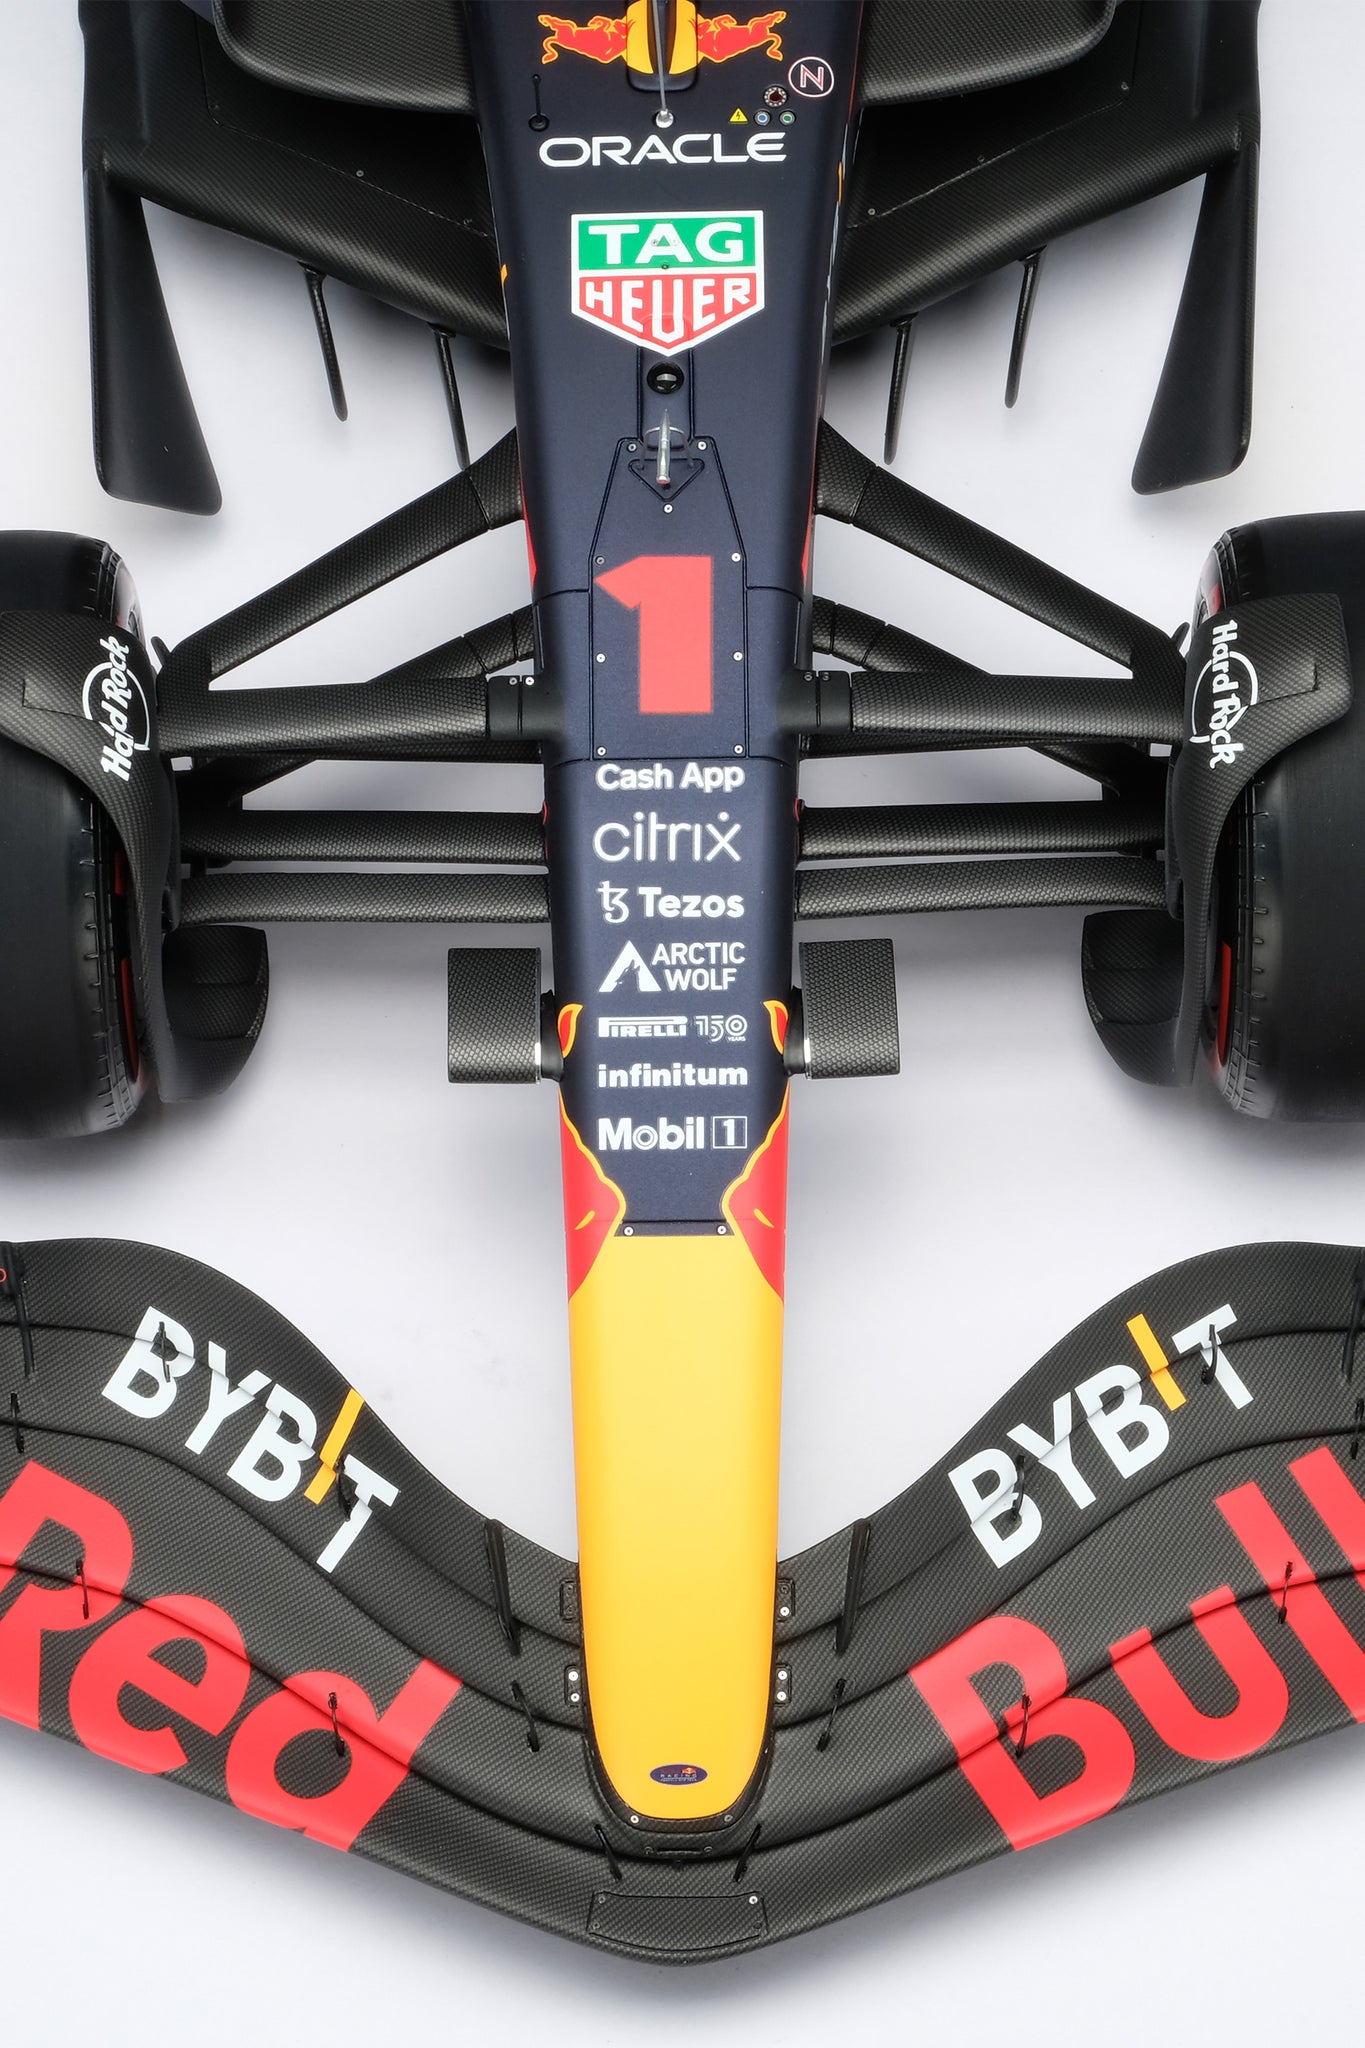 RB18 at 1:8 scale